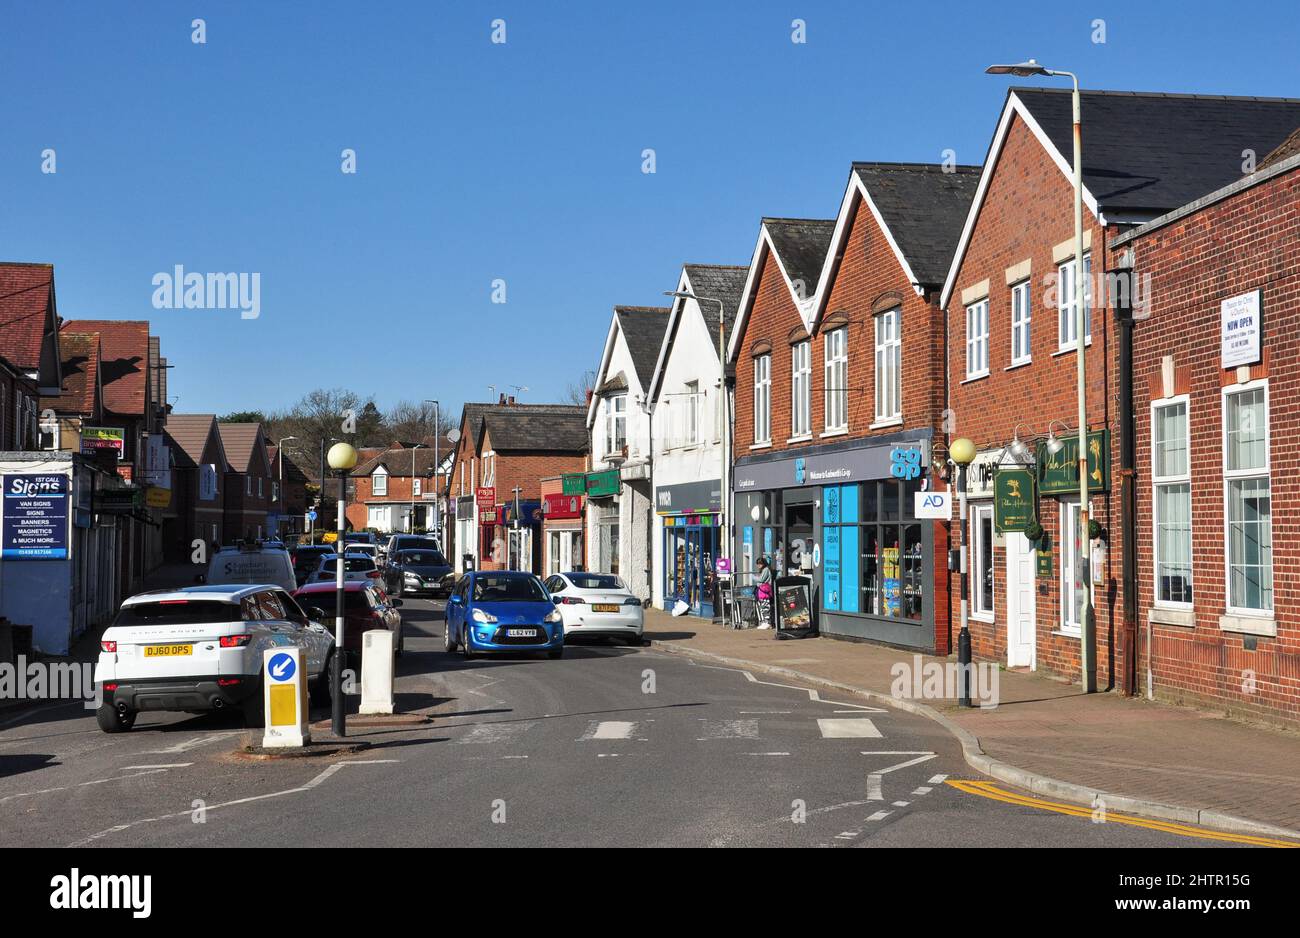 Busy High Street à Knebworth, Hertfordshire, Angleterre, Royaume-Uni Banque D'Images